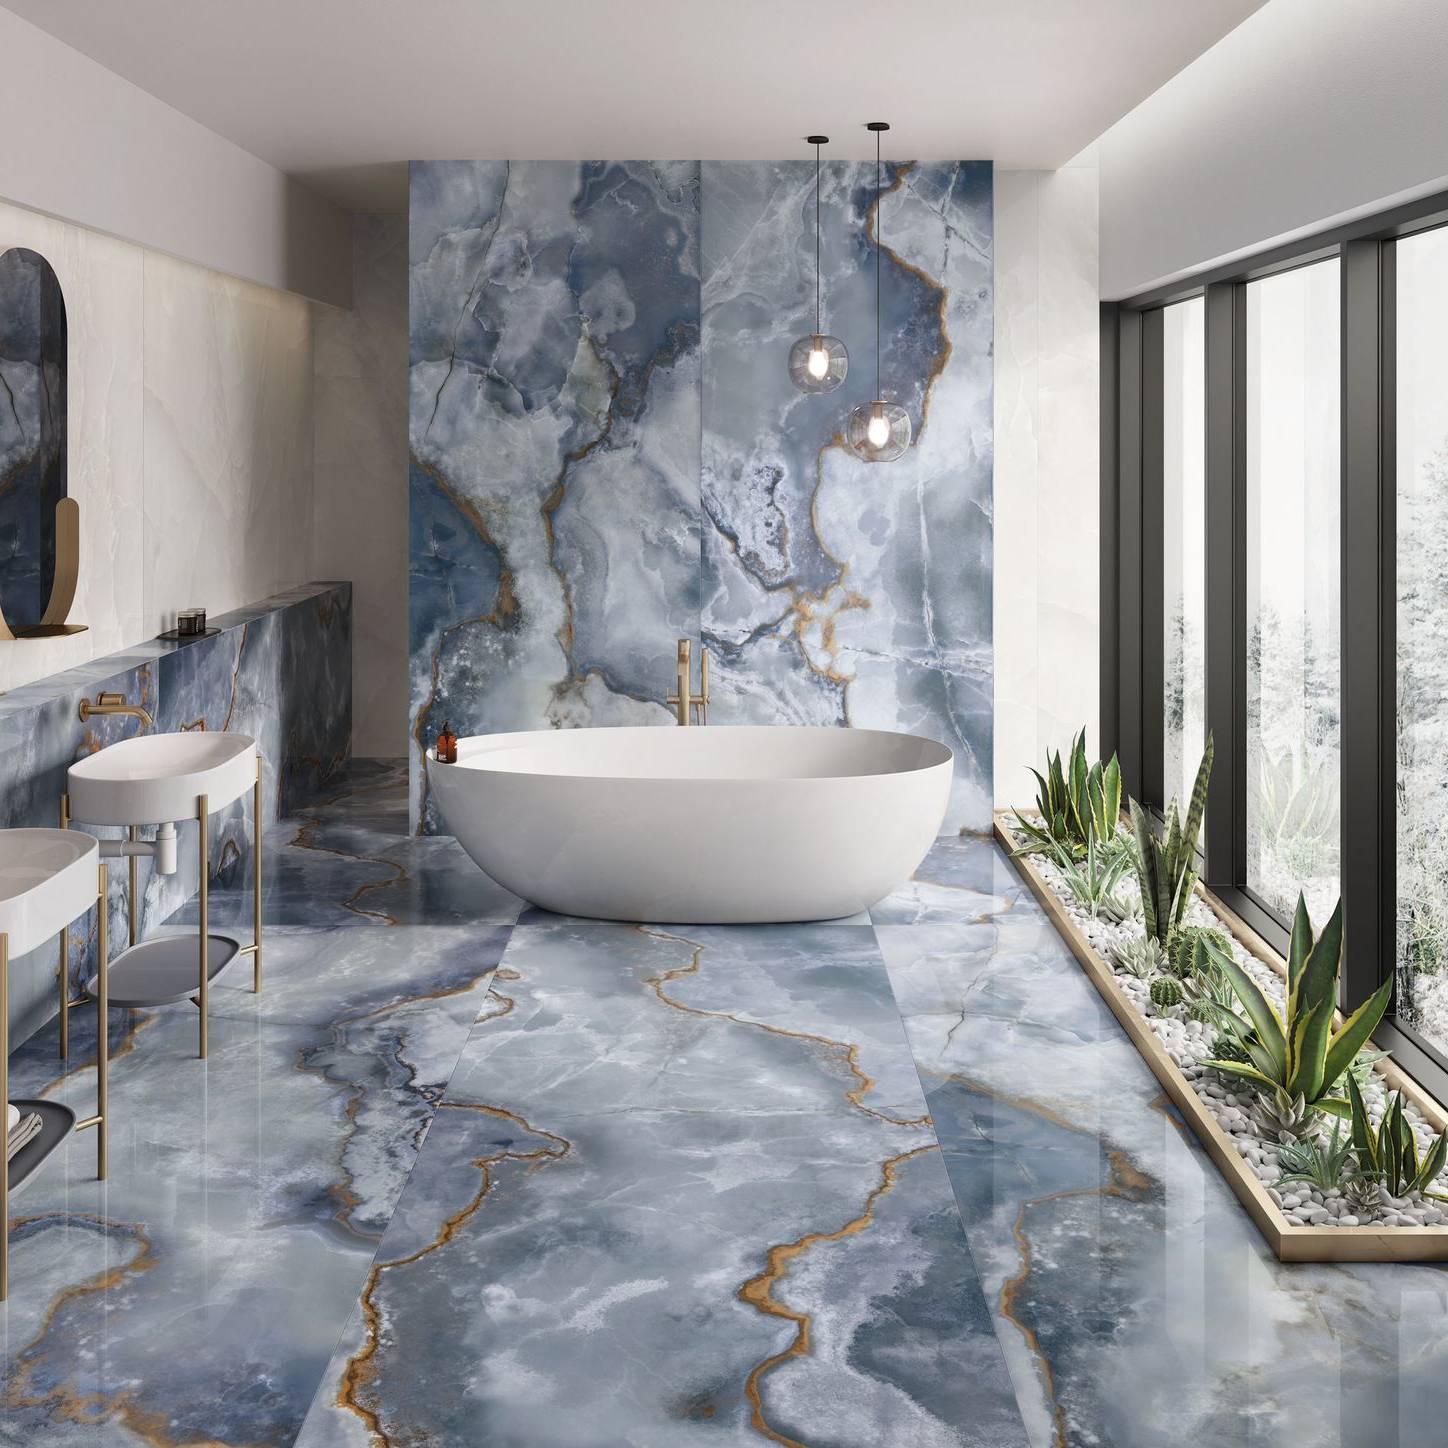 Onyx 11 | Stones And More | Finest selection of Mosaics, Glass, Tile and Stone